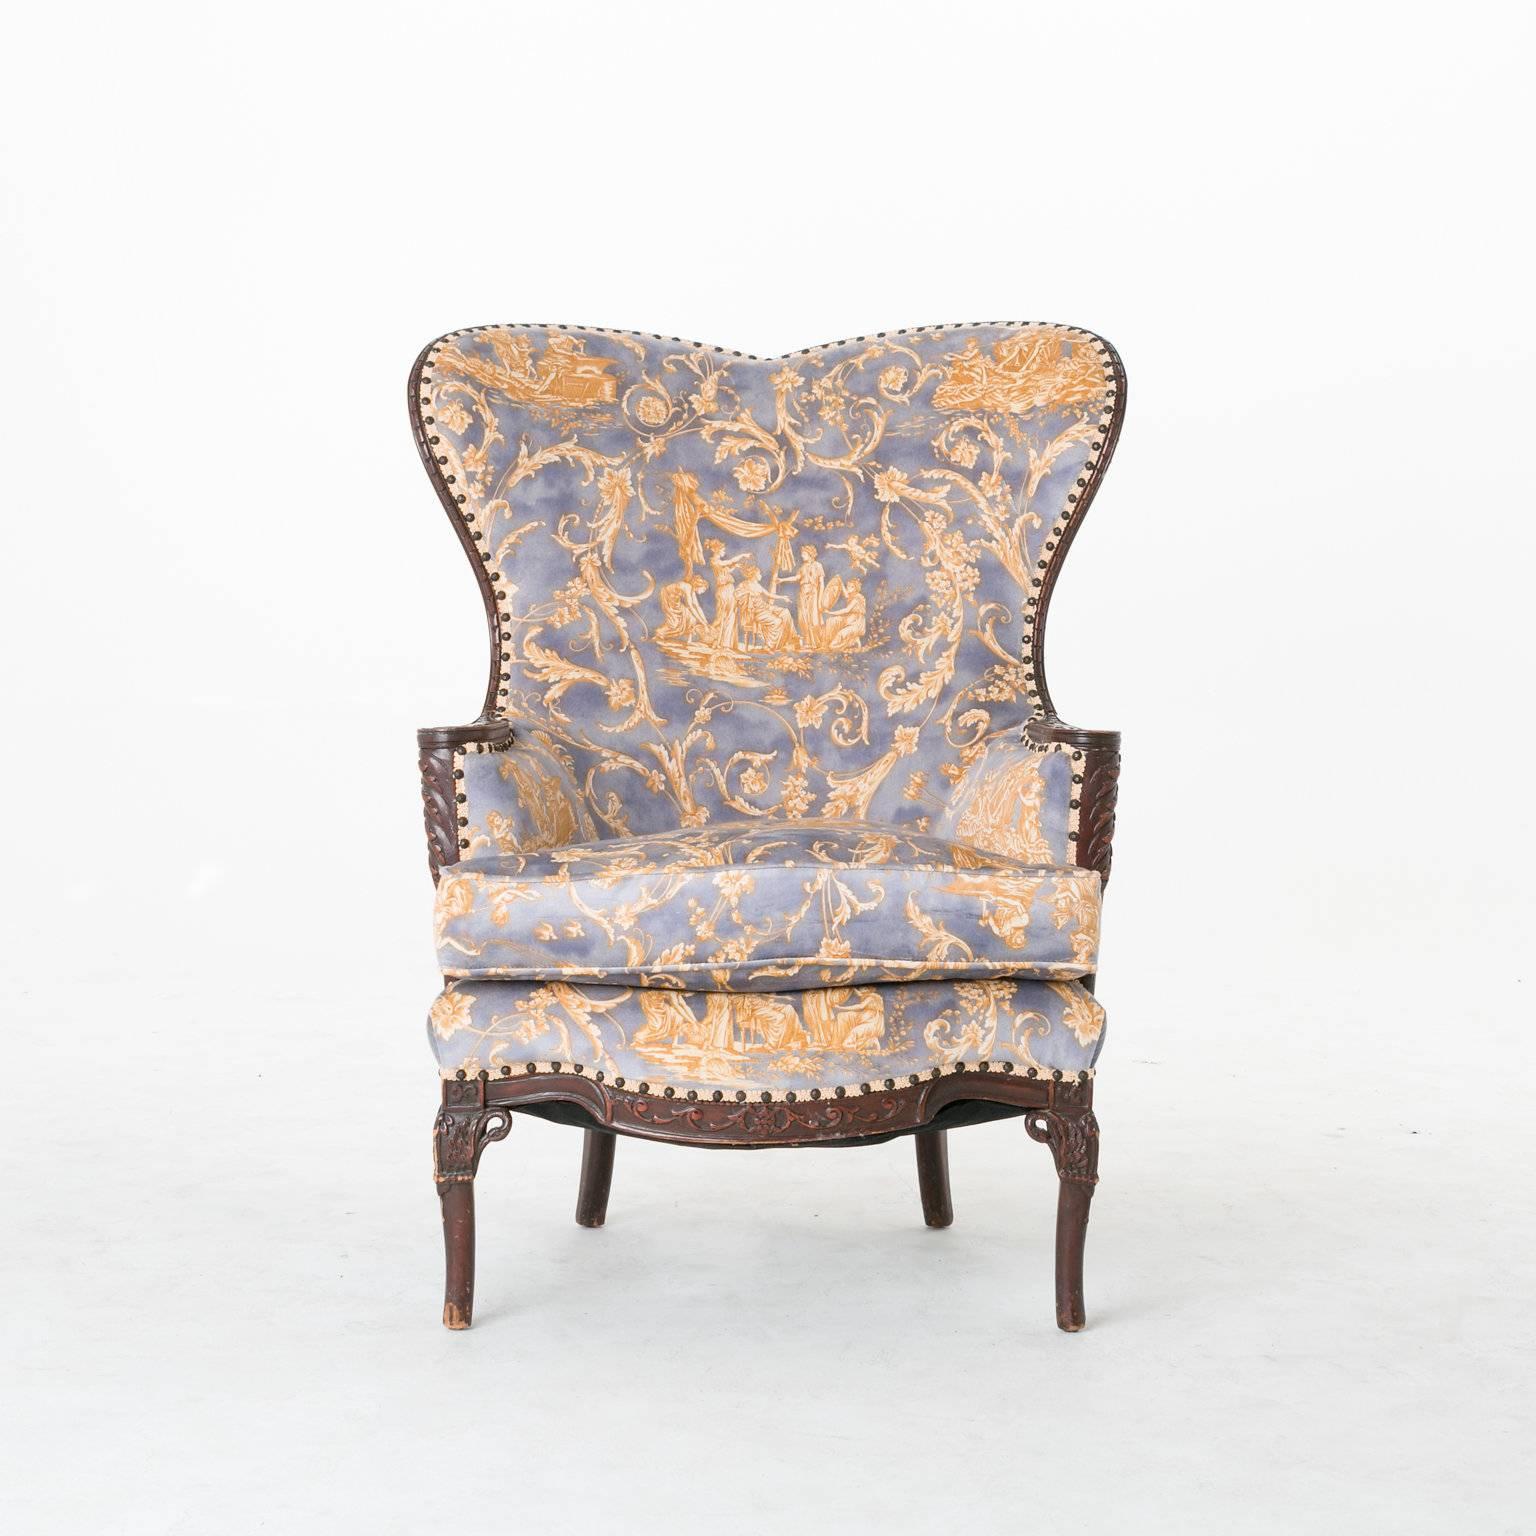 Stunning antique French Louis XV armchair. The chair has been upholstered in a fantastic Hermes Mohair. We opted to leave the wood in the original finish to retain the charm and look. Measures: The seat depth is 21 in. Deep x  20 in. Wide.

In order